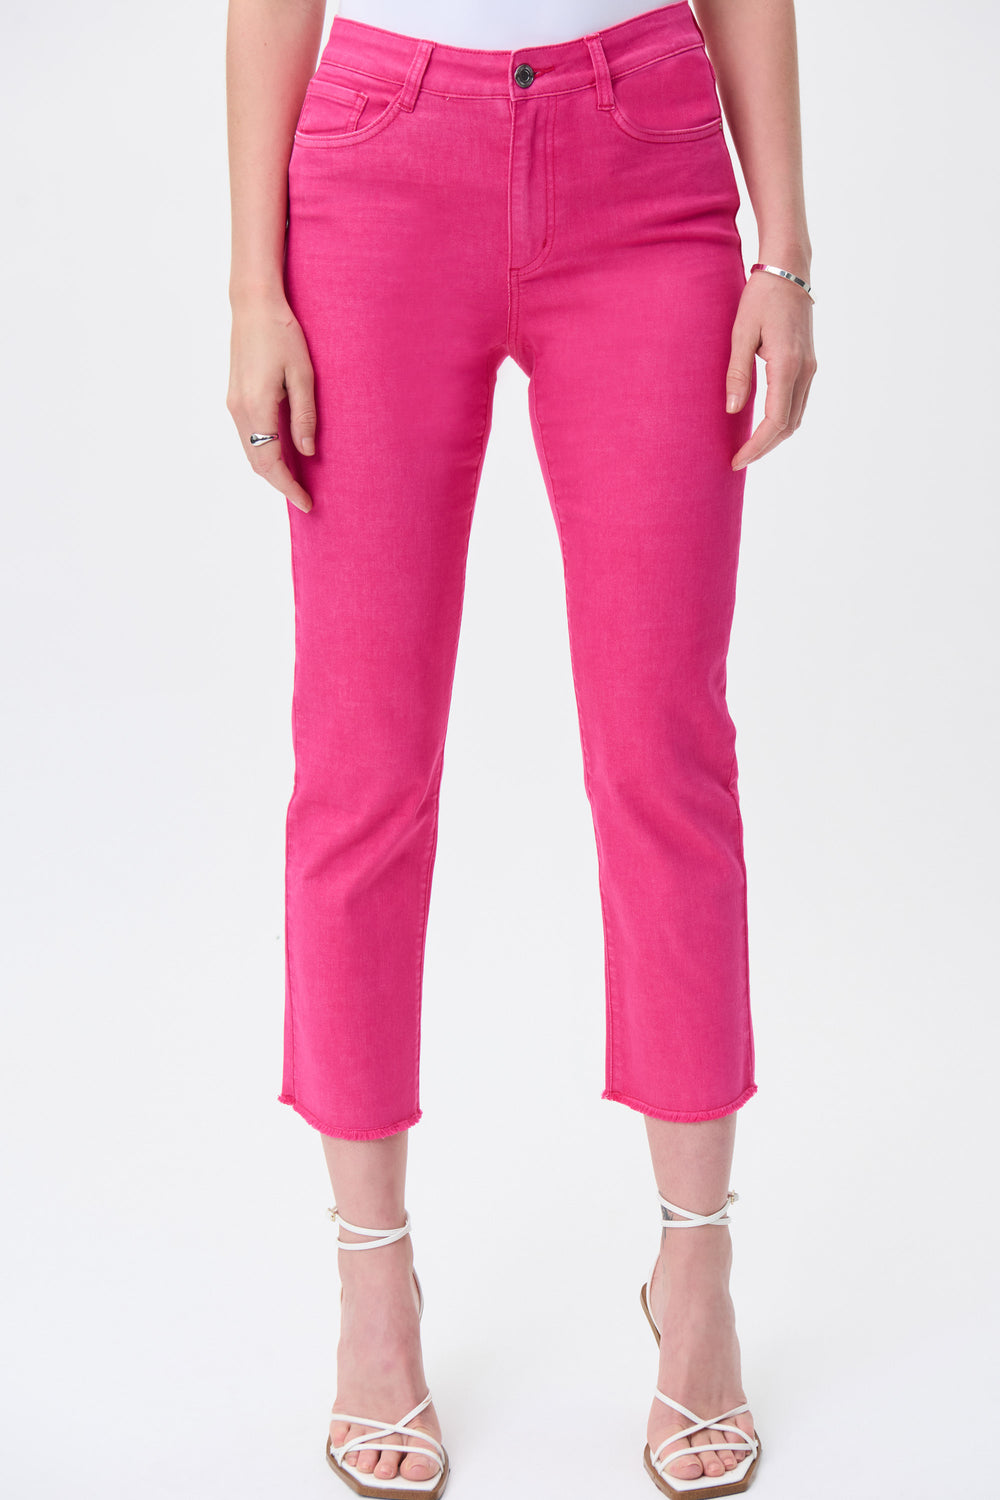 JOSEPH RIBKOFF SPRING 2023 women's casual colourful slim cropped jeans - pink front